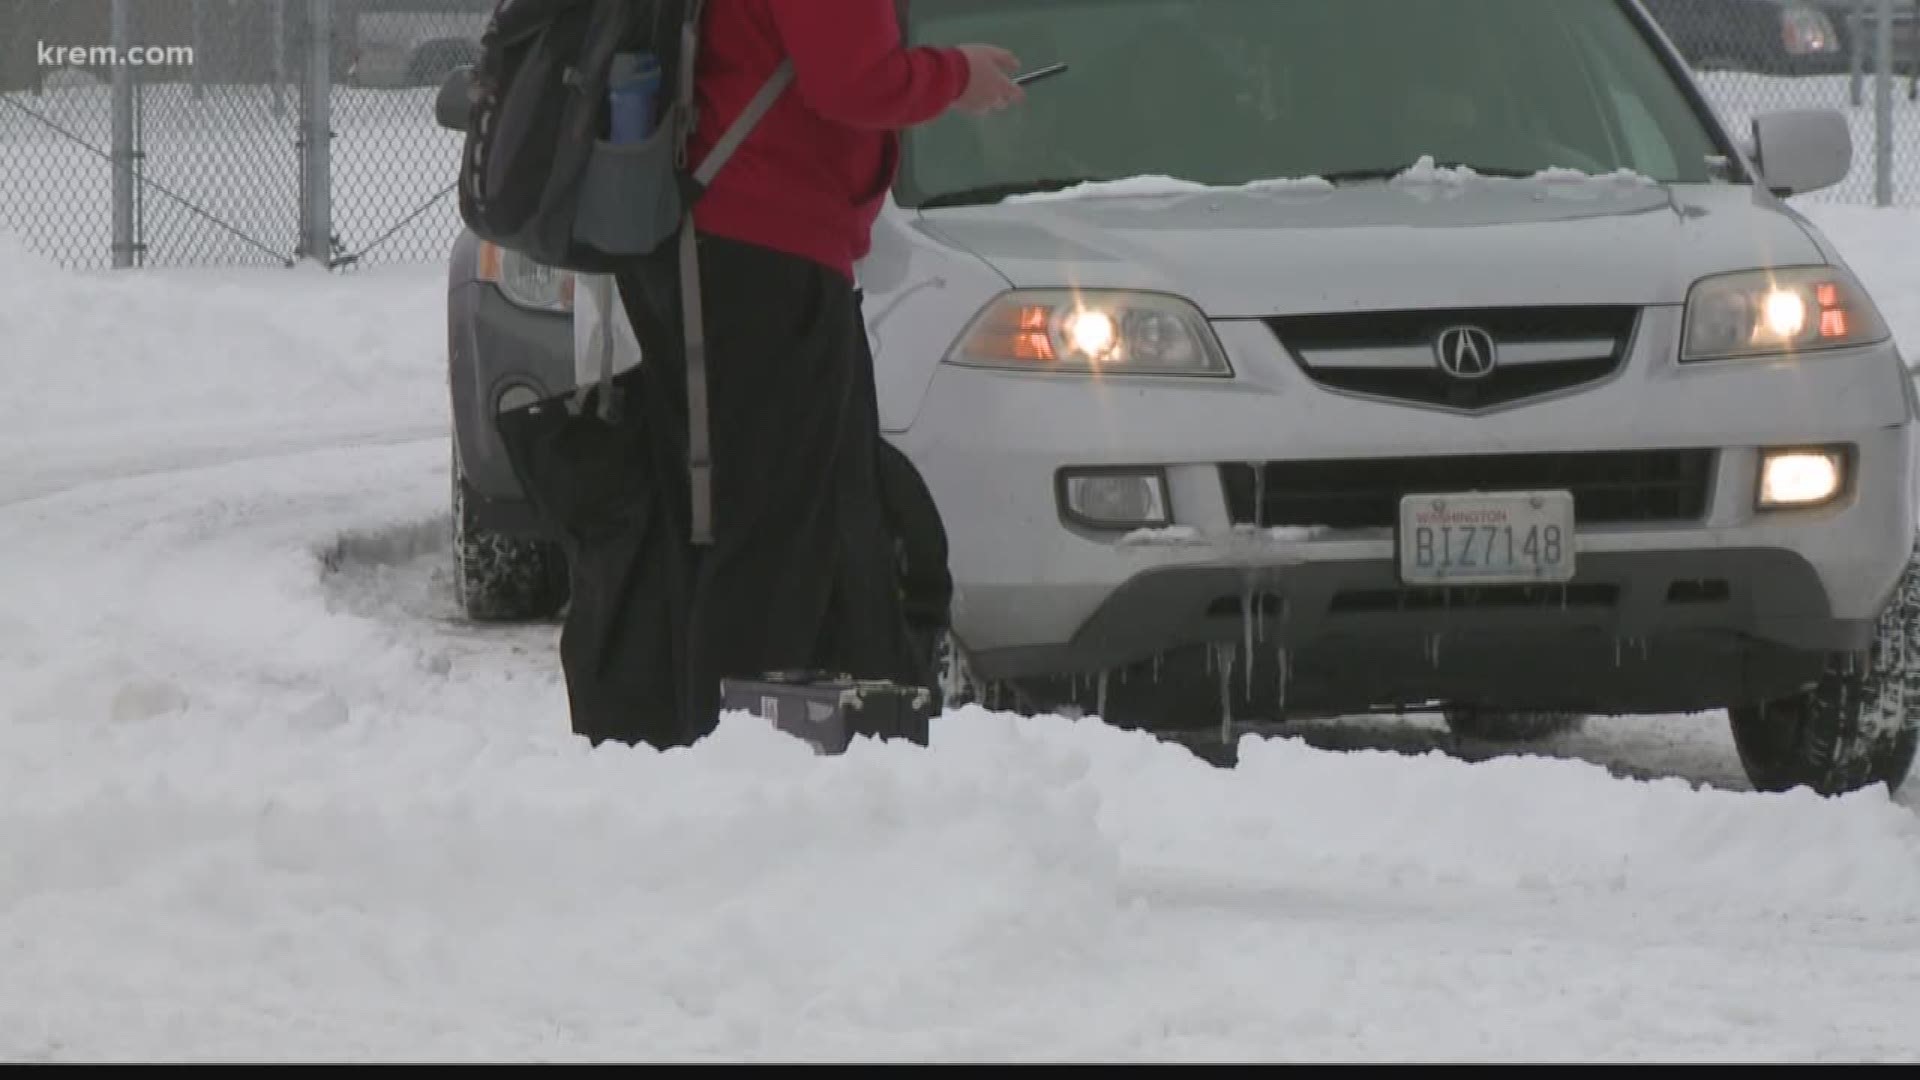 Spokane Public School leaders explain how students will make up Tuesday's snow day.